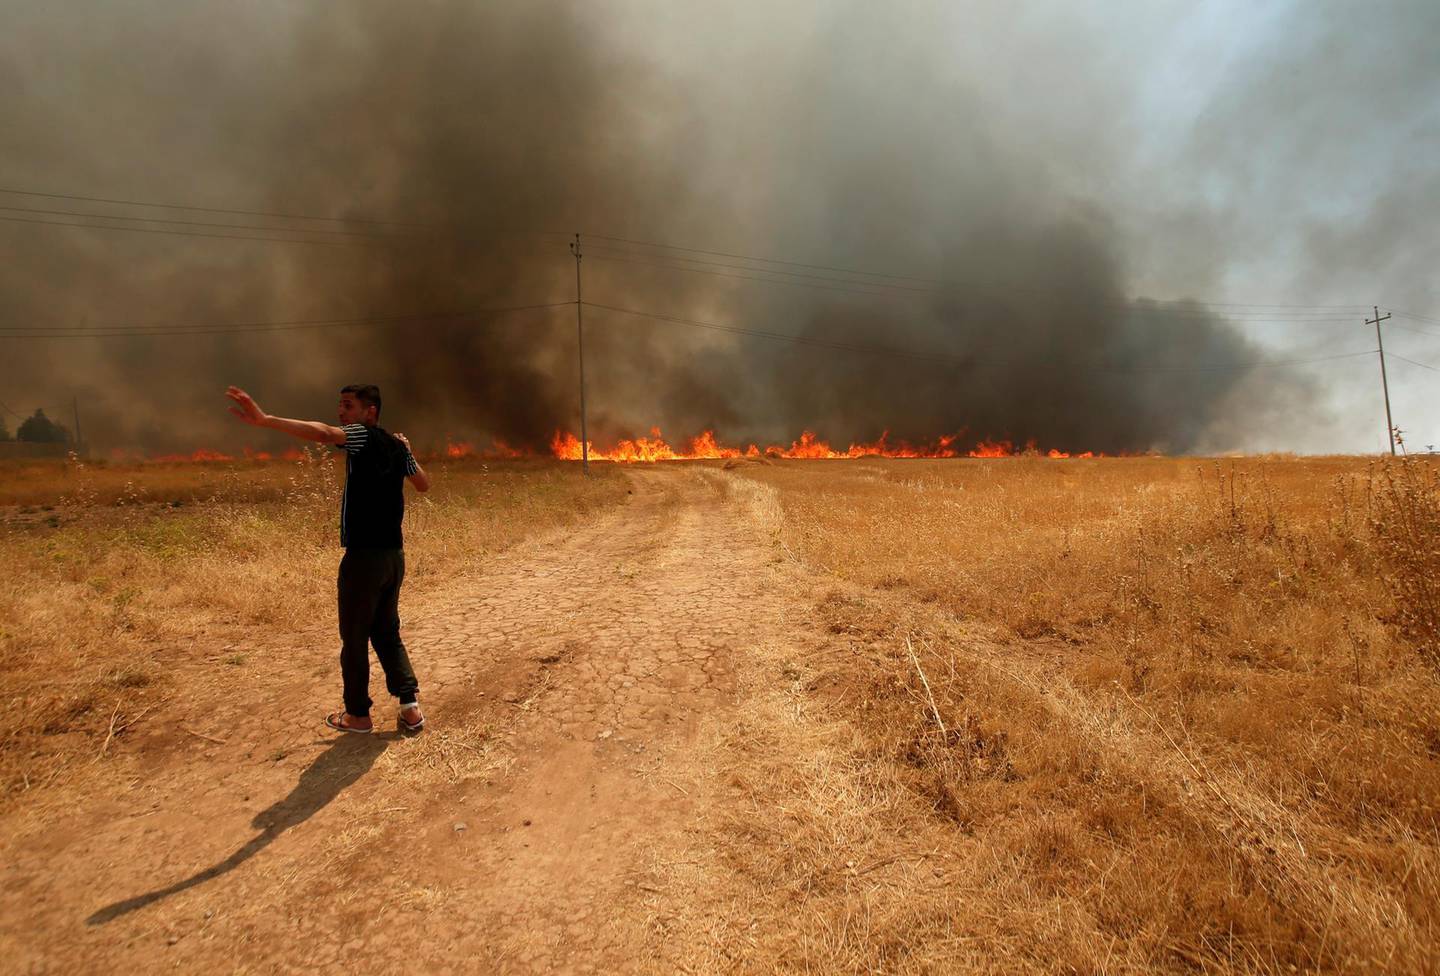 An Iraqi asks for help to put out a fire in Bashiqa in 2019. In recent years, ISIS fighters have torched fields in Iraq and Syria. Reuters